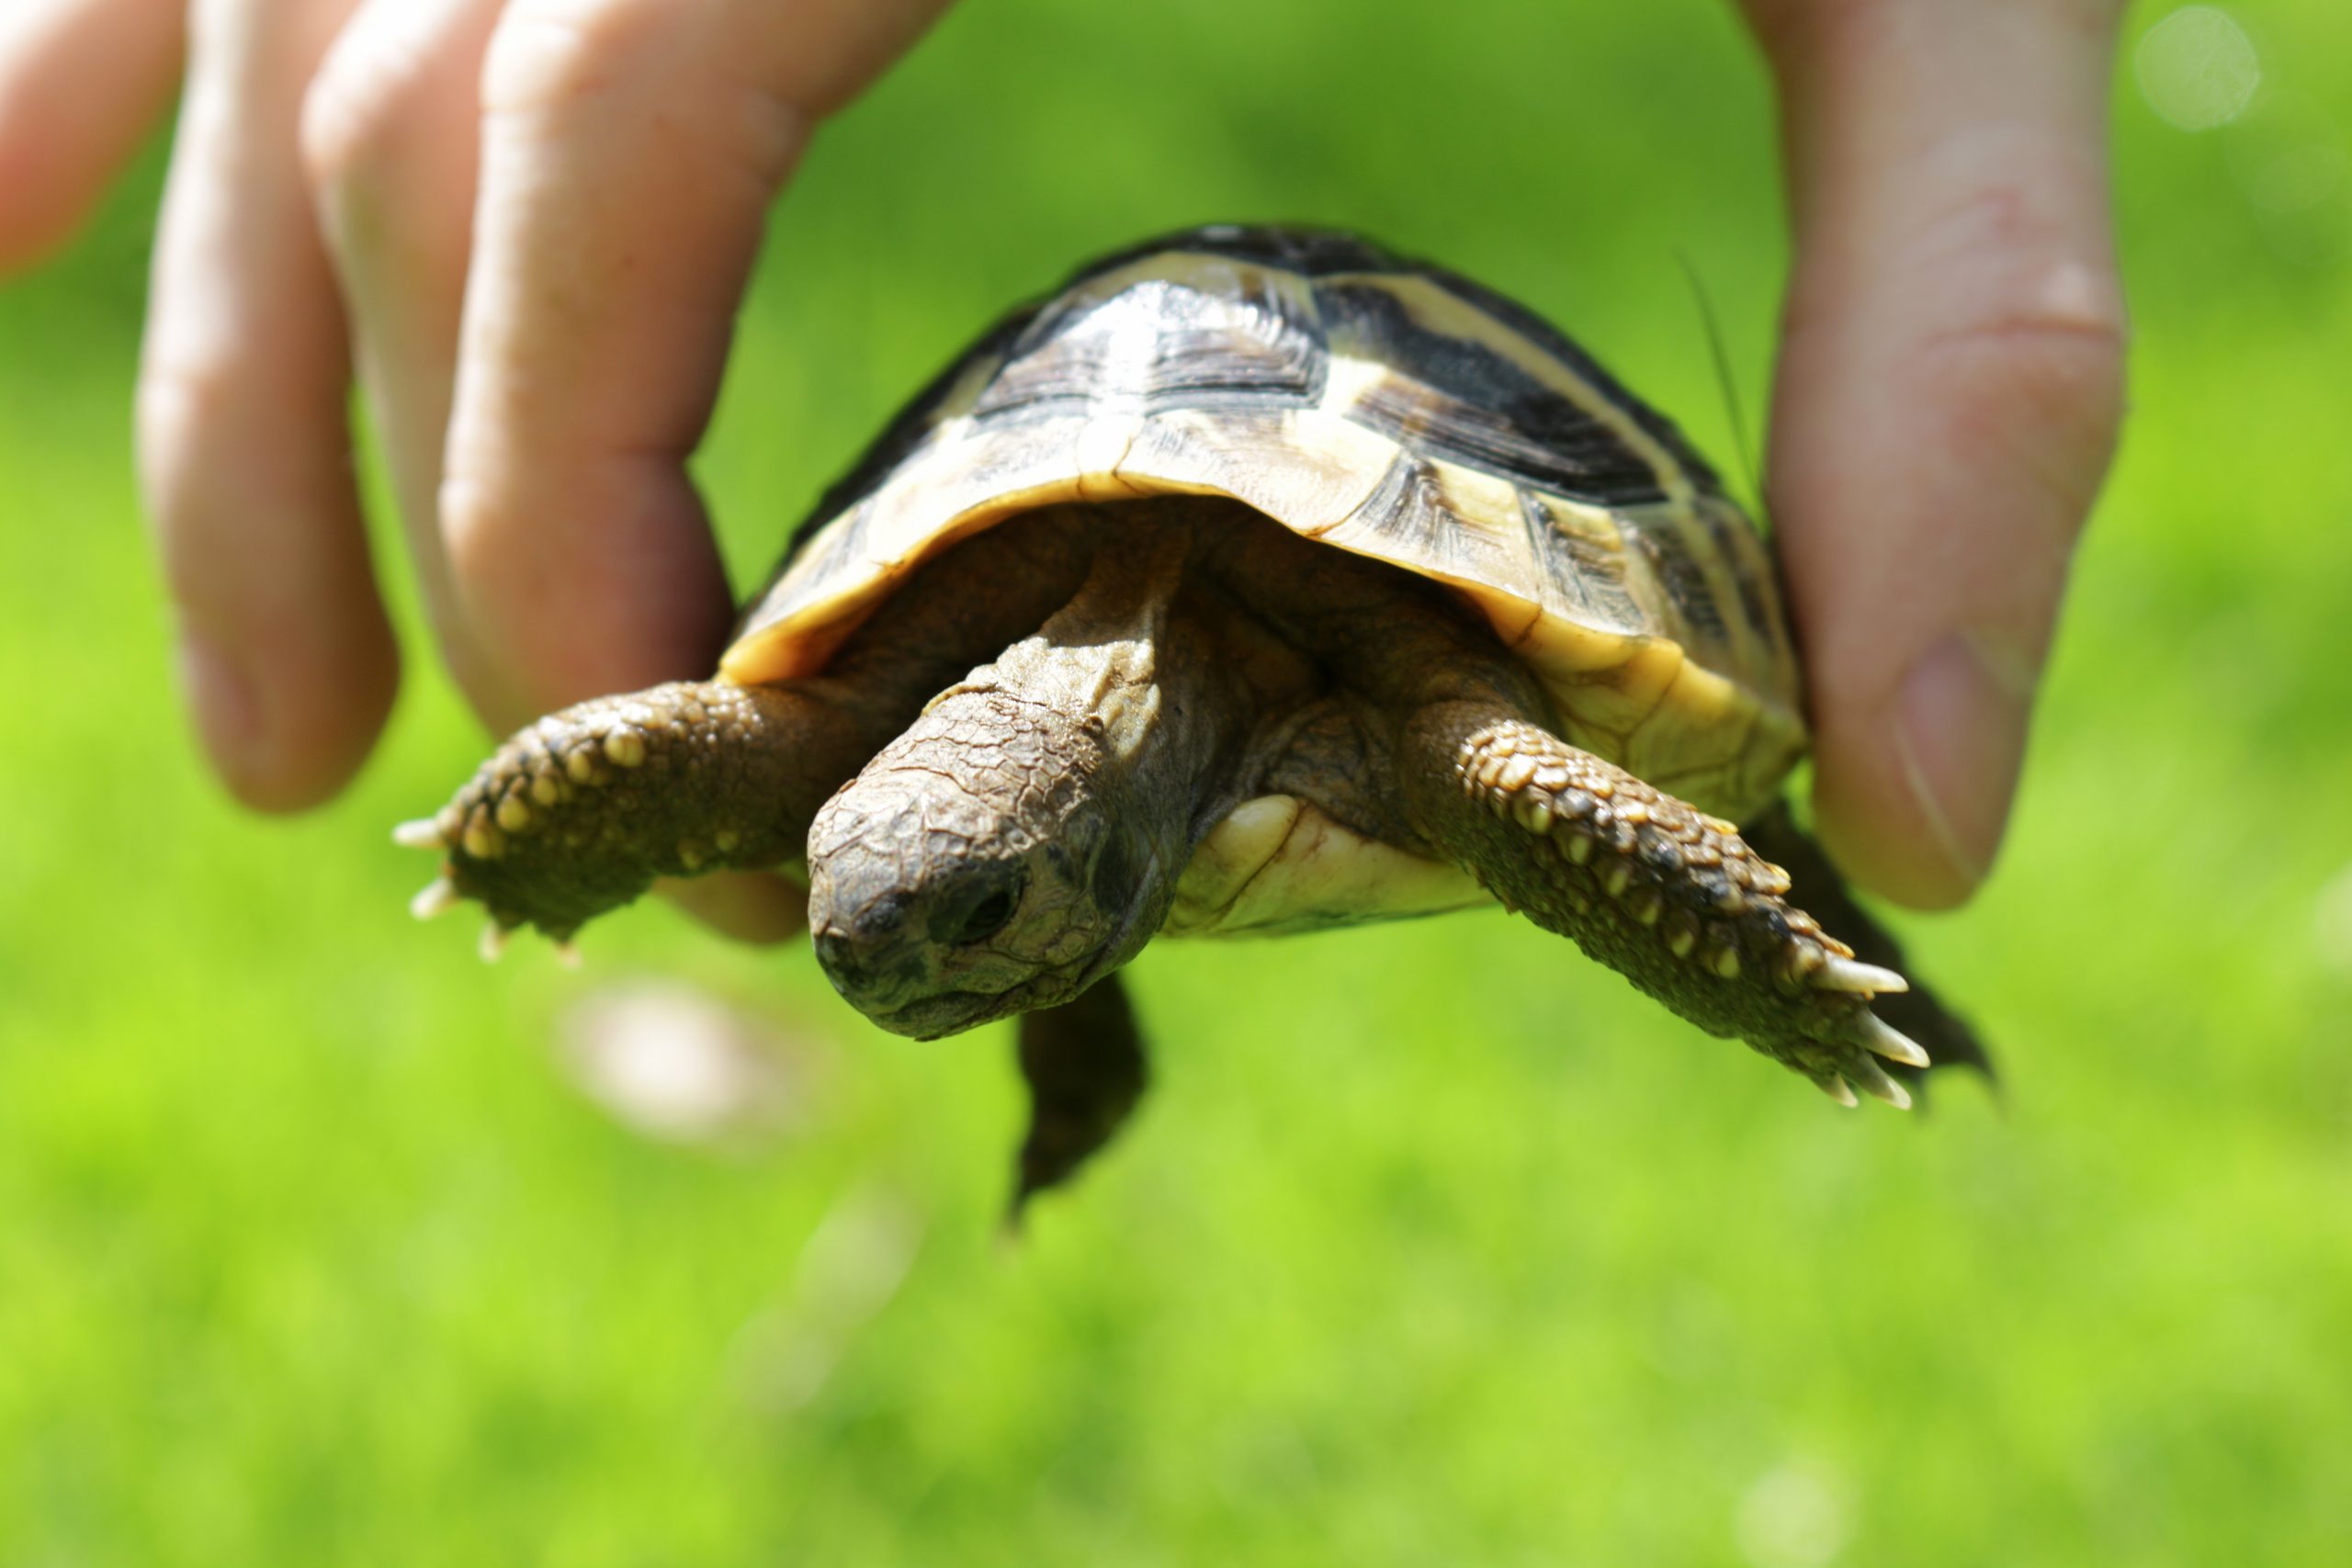 Image of young tame and friendly baby pet Russian Hartsfield diet / Hermann's tortoise being held in hand outdoors in garden sunshine for vitamins above green lawn grass, baby tortoise in fingers to show size and scale, with head, legs and claws hanging